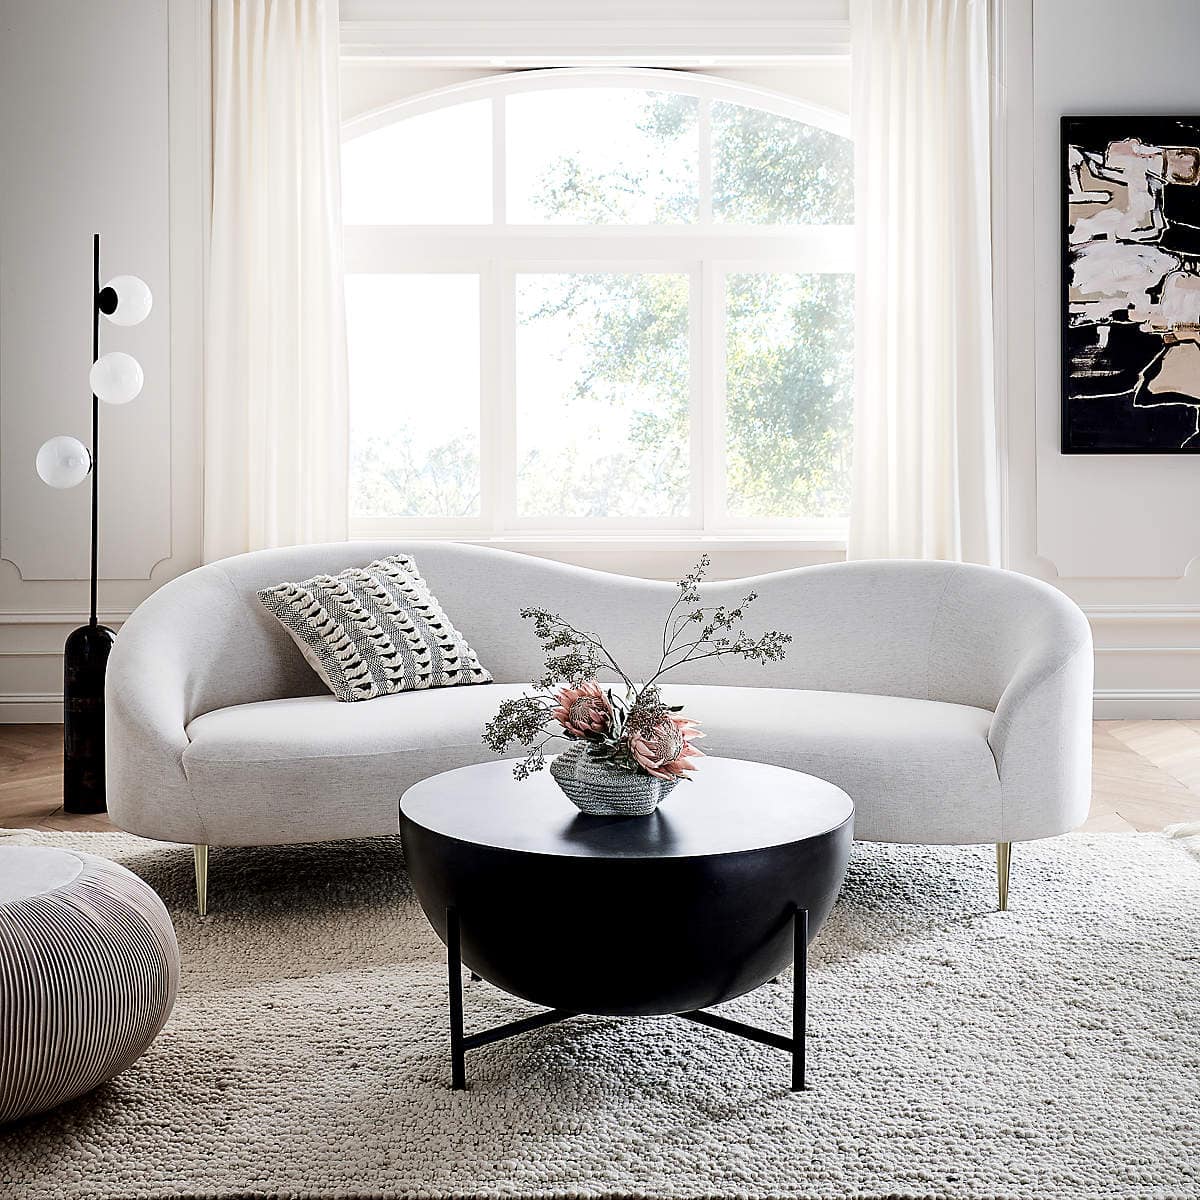 Add Texture to Your Room with a Cement Coffee Table